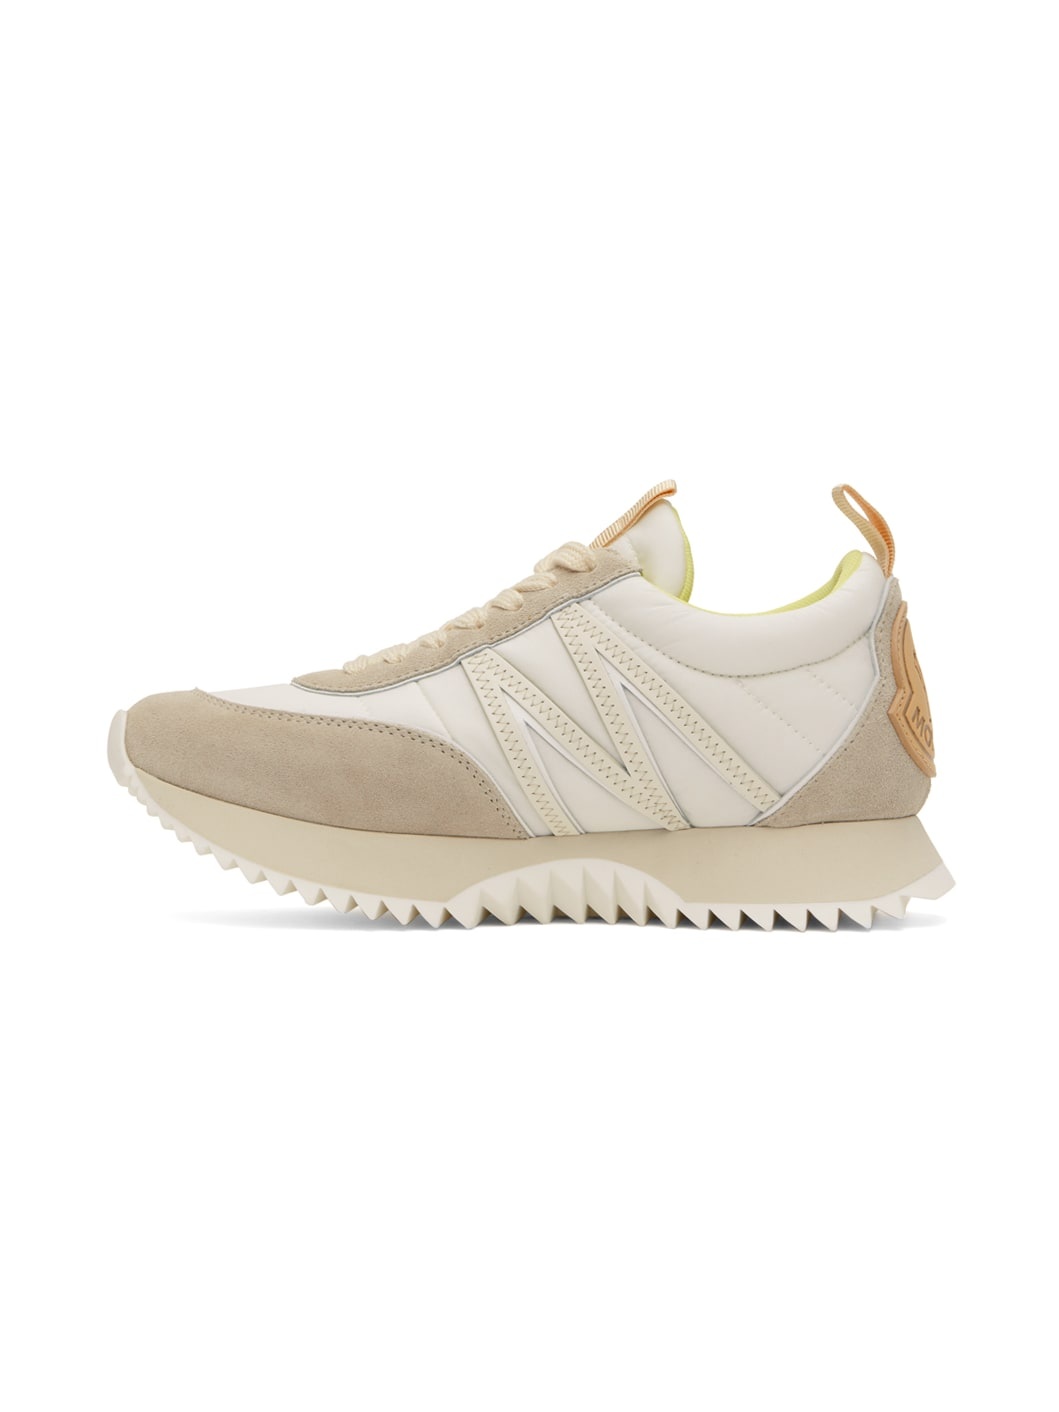 Beige & White Pacey Sneakers - 3